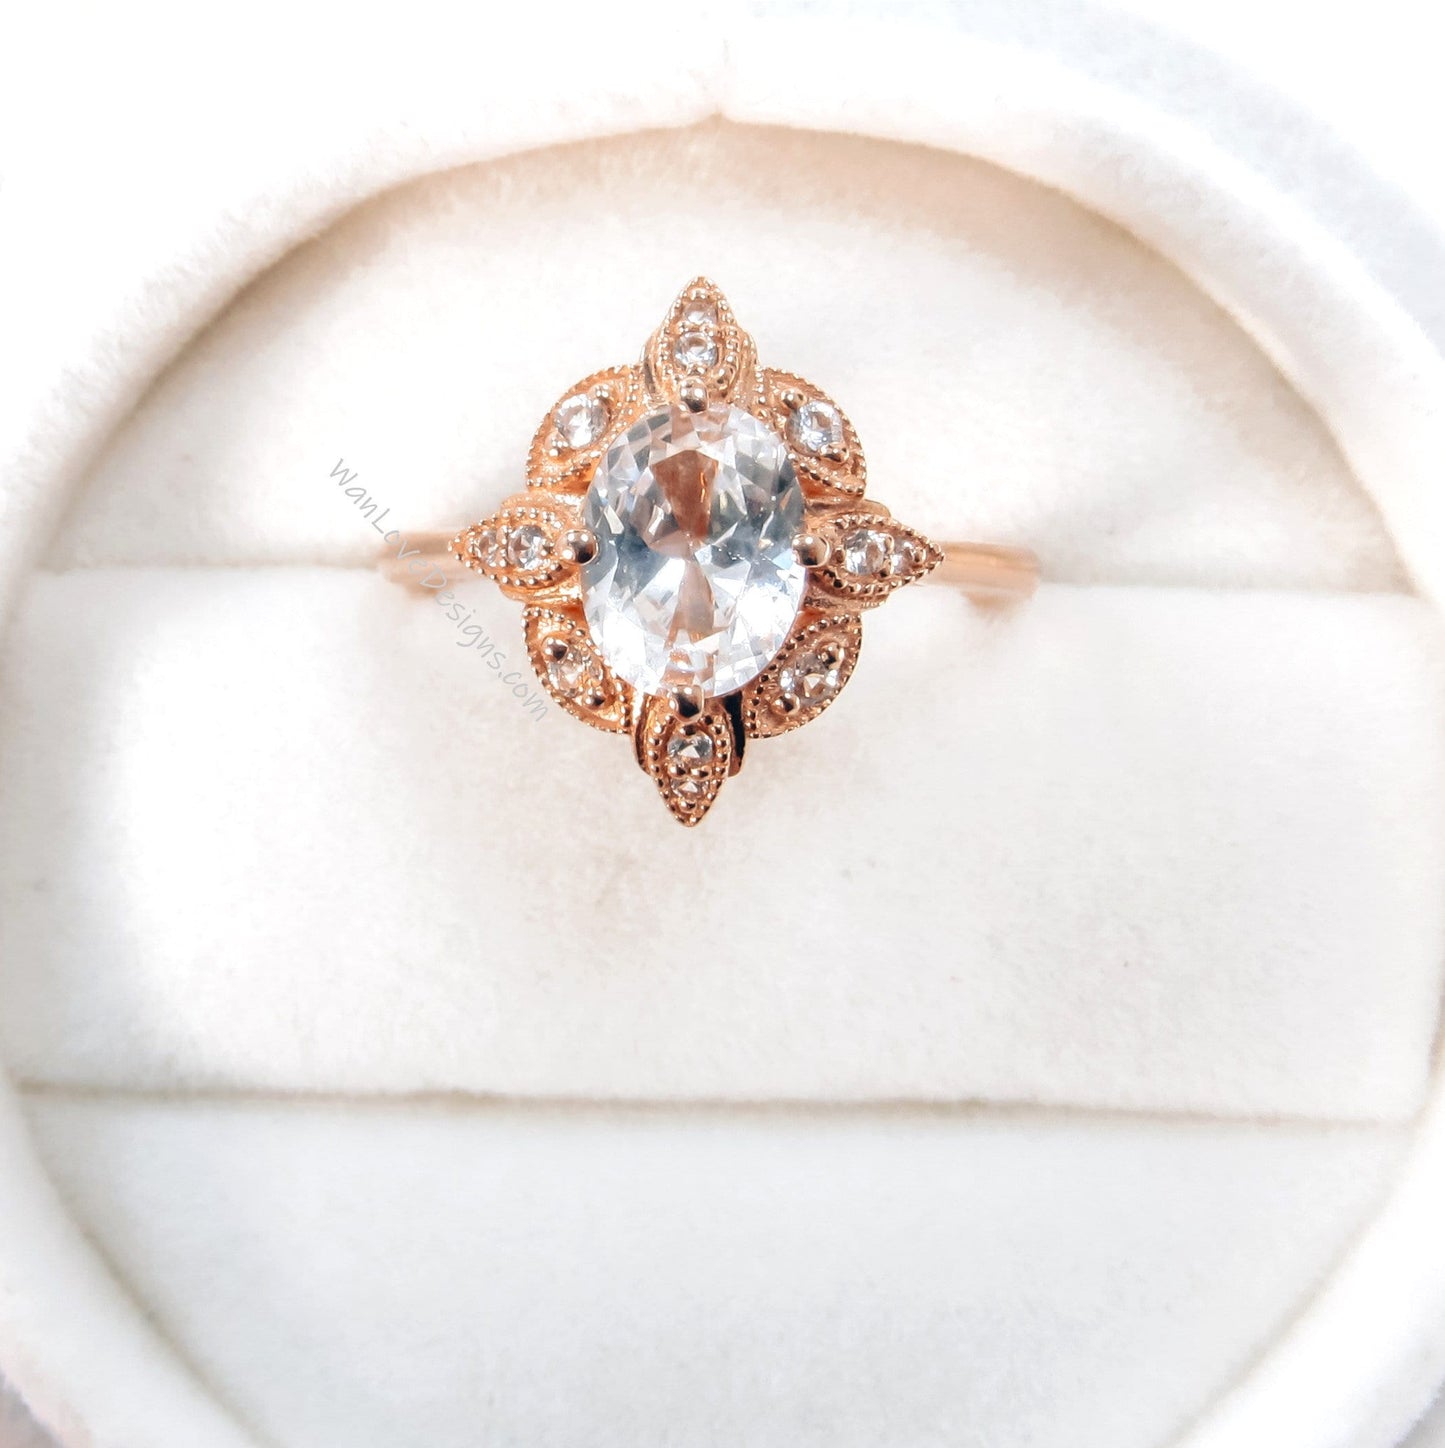 Antique oval shape White Sapphire engagement ring vintage rose gold milgrain ring oval cut diamond halo ring anniversary promise bridal ring Wan Love Designs